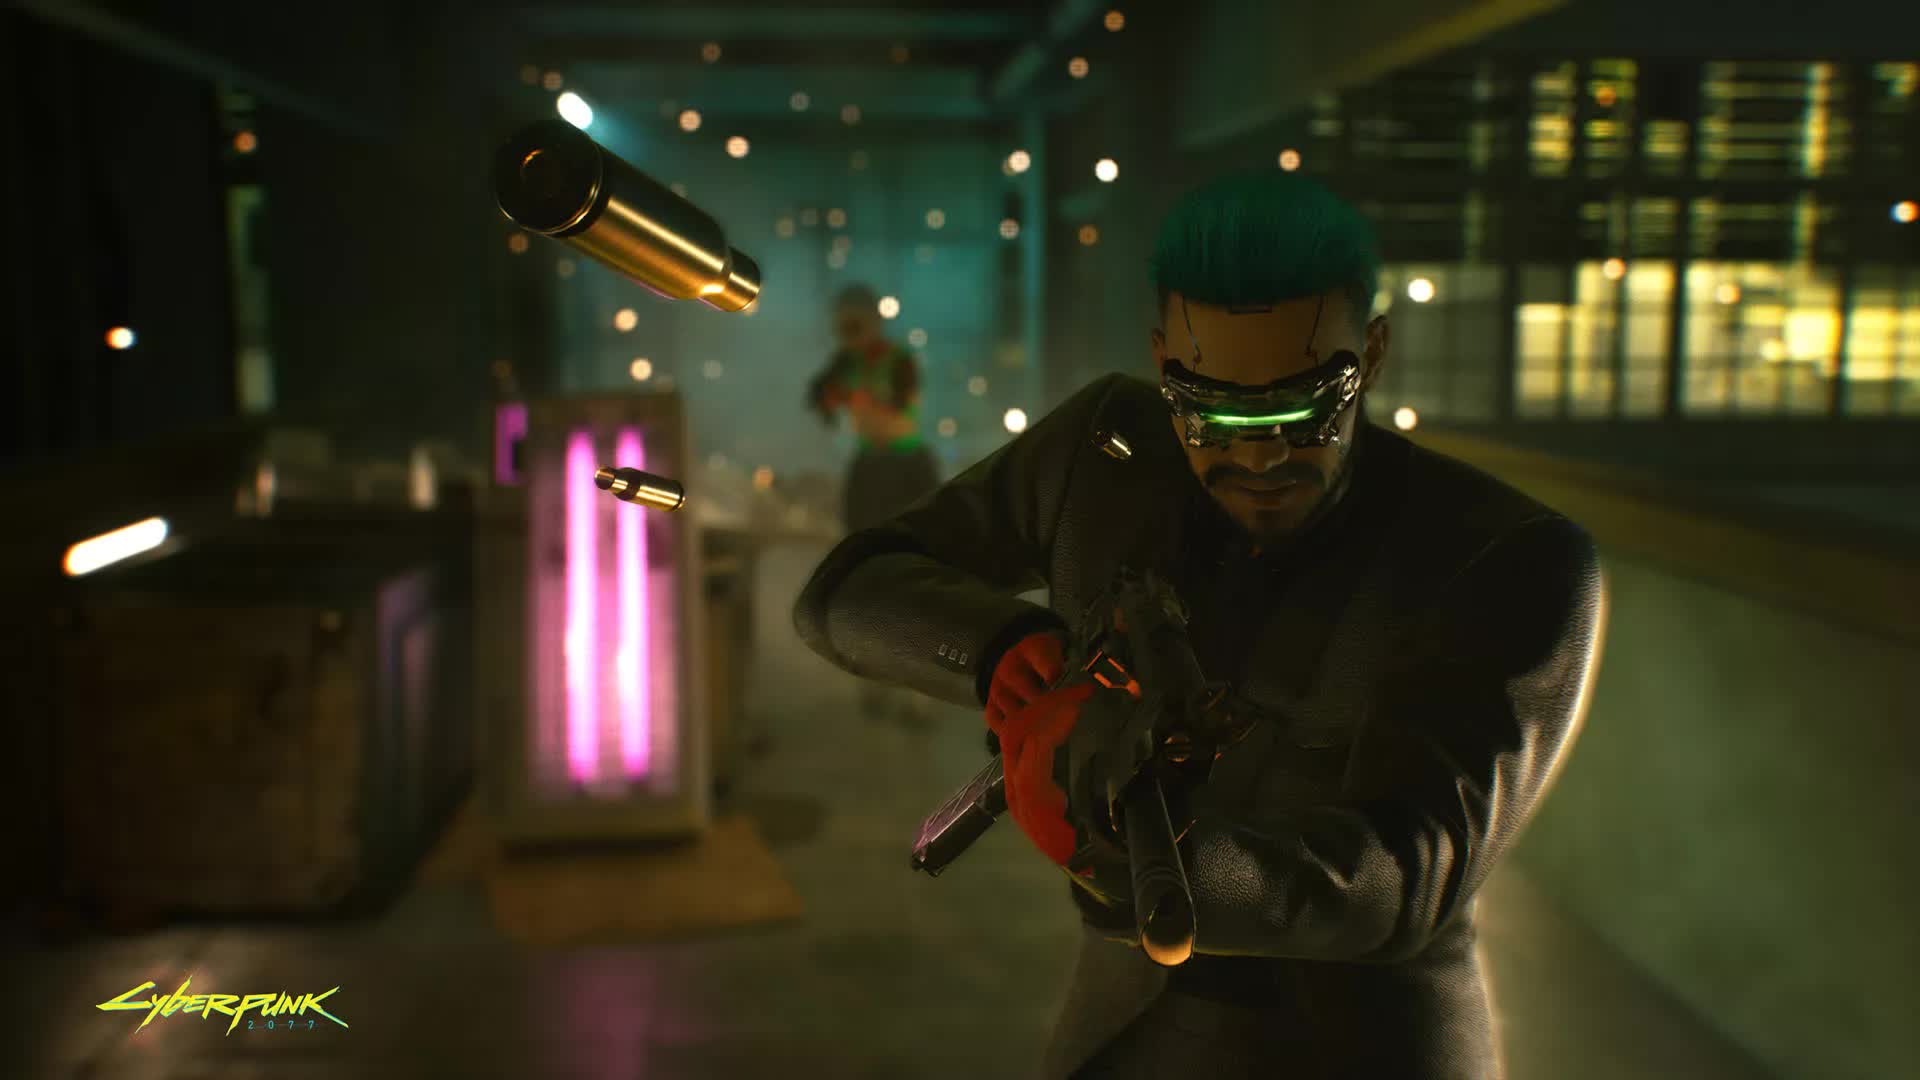 Class-action lawsuits reportedly brewing over Cyberpunk 2077 buggy launch